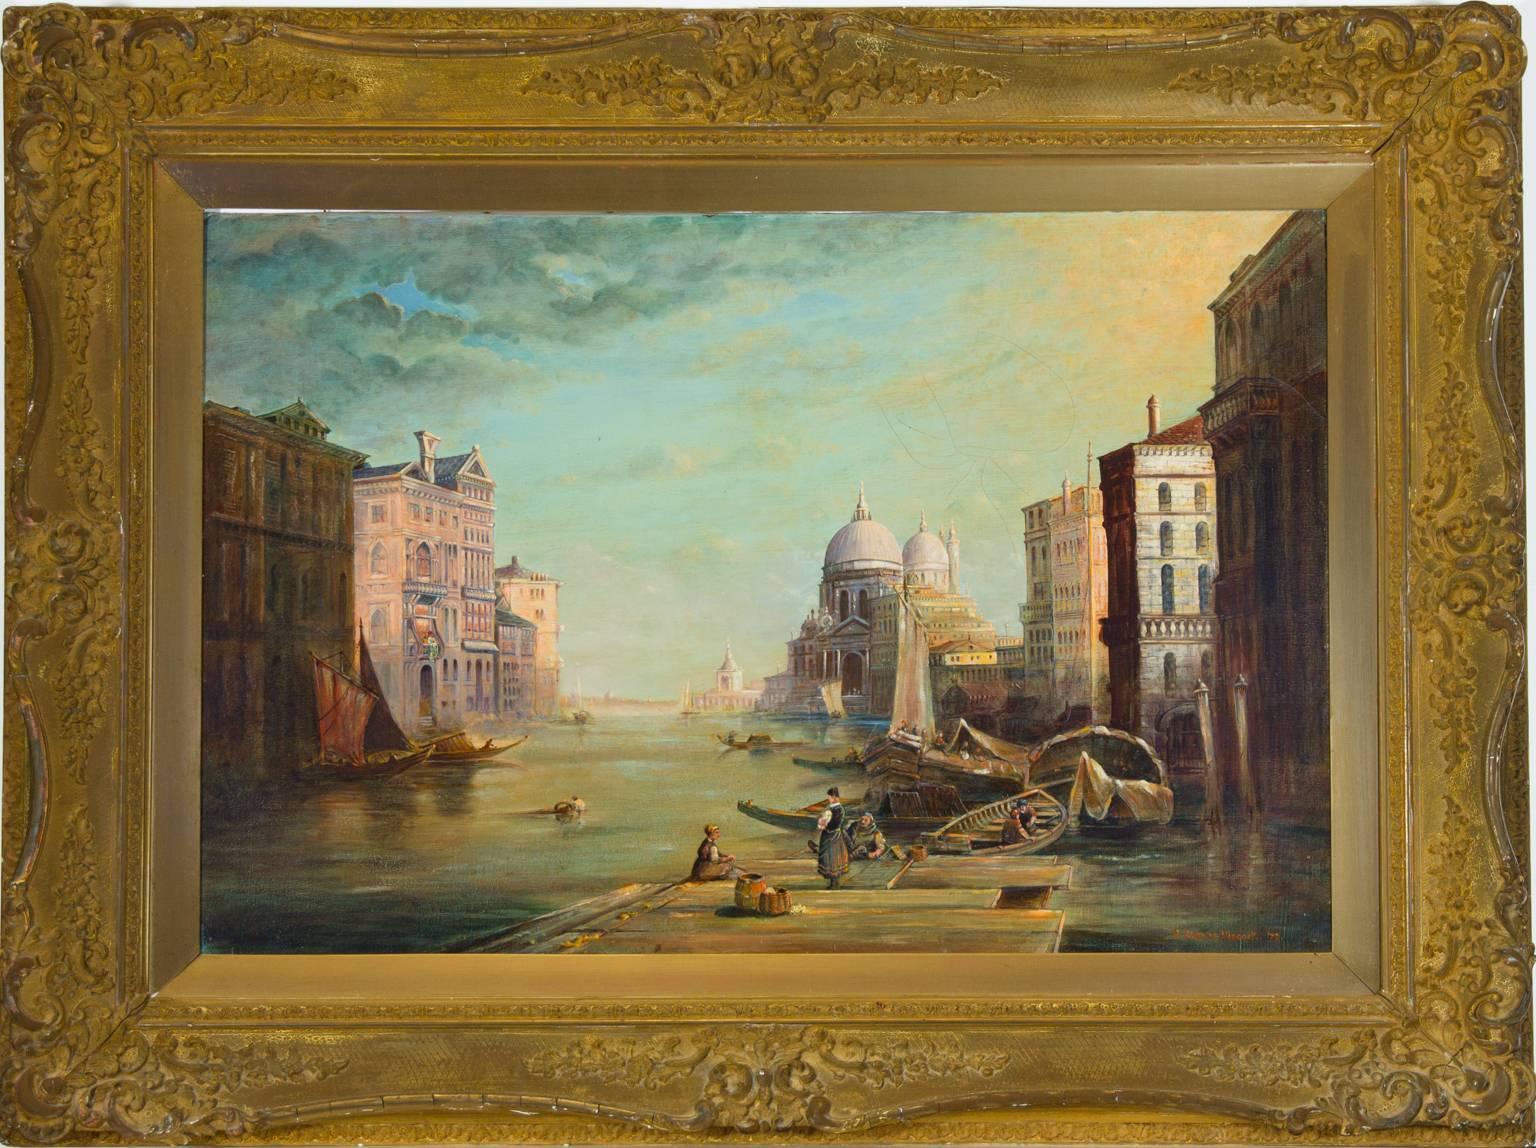 An impressive 1979 signed oil painting by J. Charles Hiscock, depicting the Grand Canal in Venice, with St Mark's and the Doge's Palace beyond. In the foreground there are figures at rest on a jetty with others in punts. Signed to the lower right,